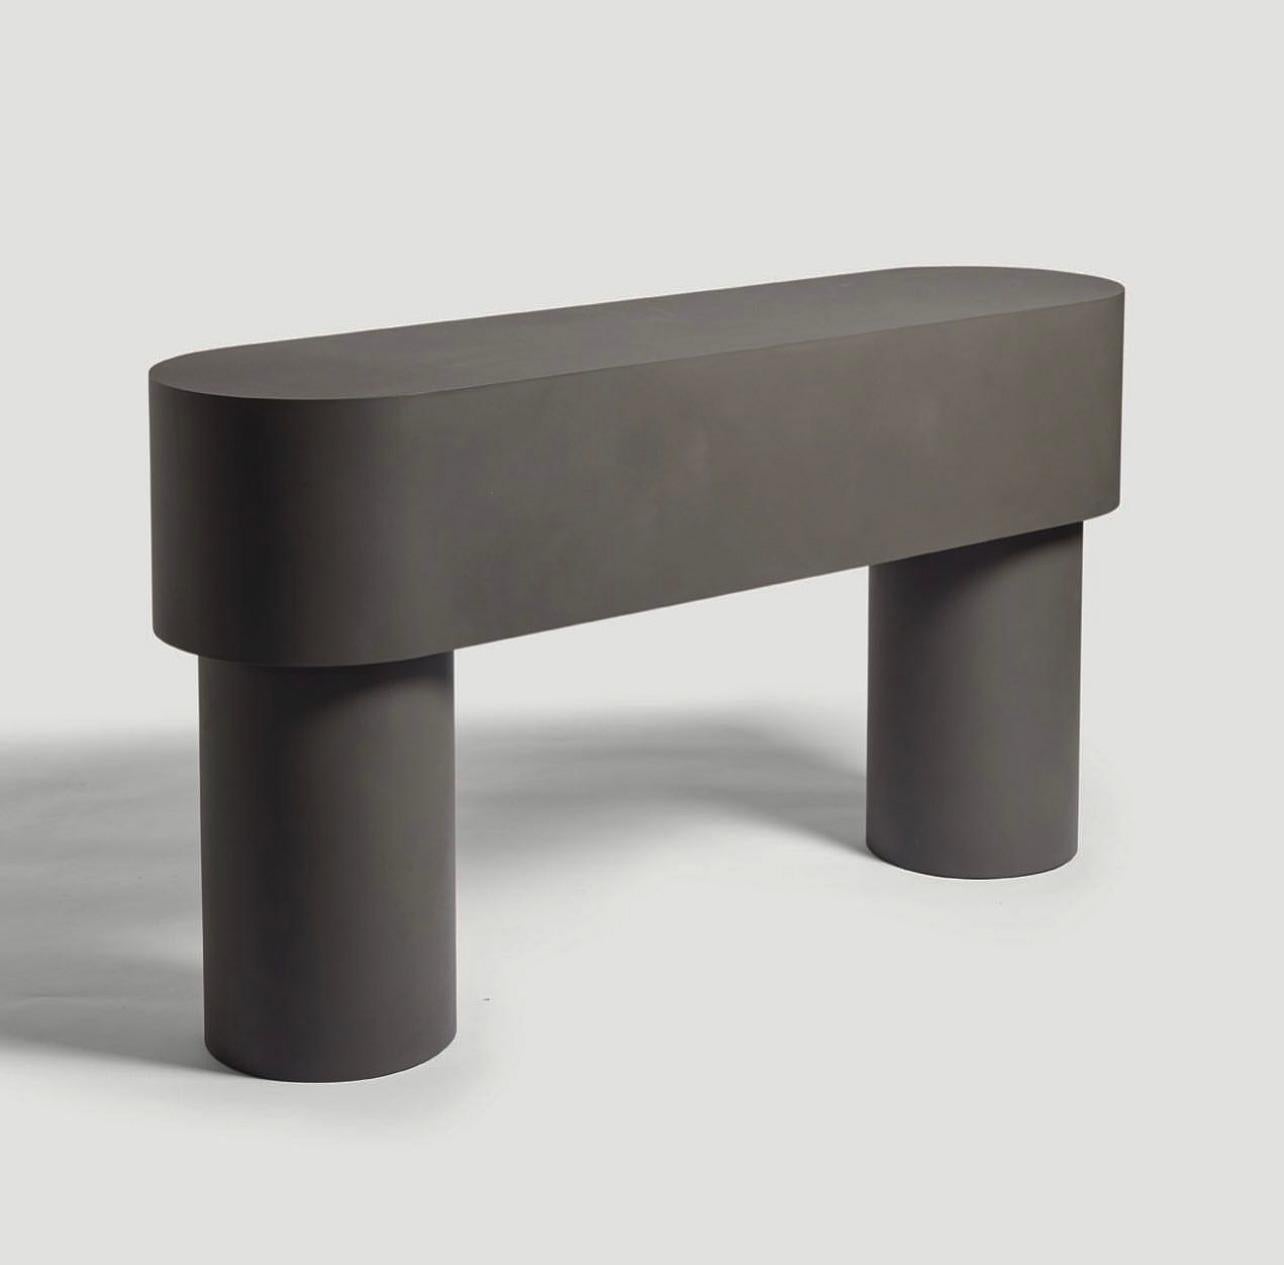 Contemporary Jesmonite console - Pilotis console table by Malgorzata Bany.

Inspired by support columns that lift a building above ground or water. Each piece is formed using a mould made of paper, used only once, making each piece unique.